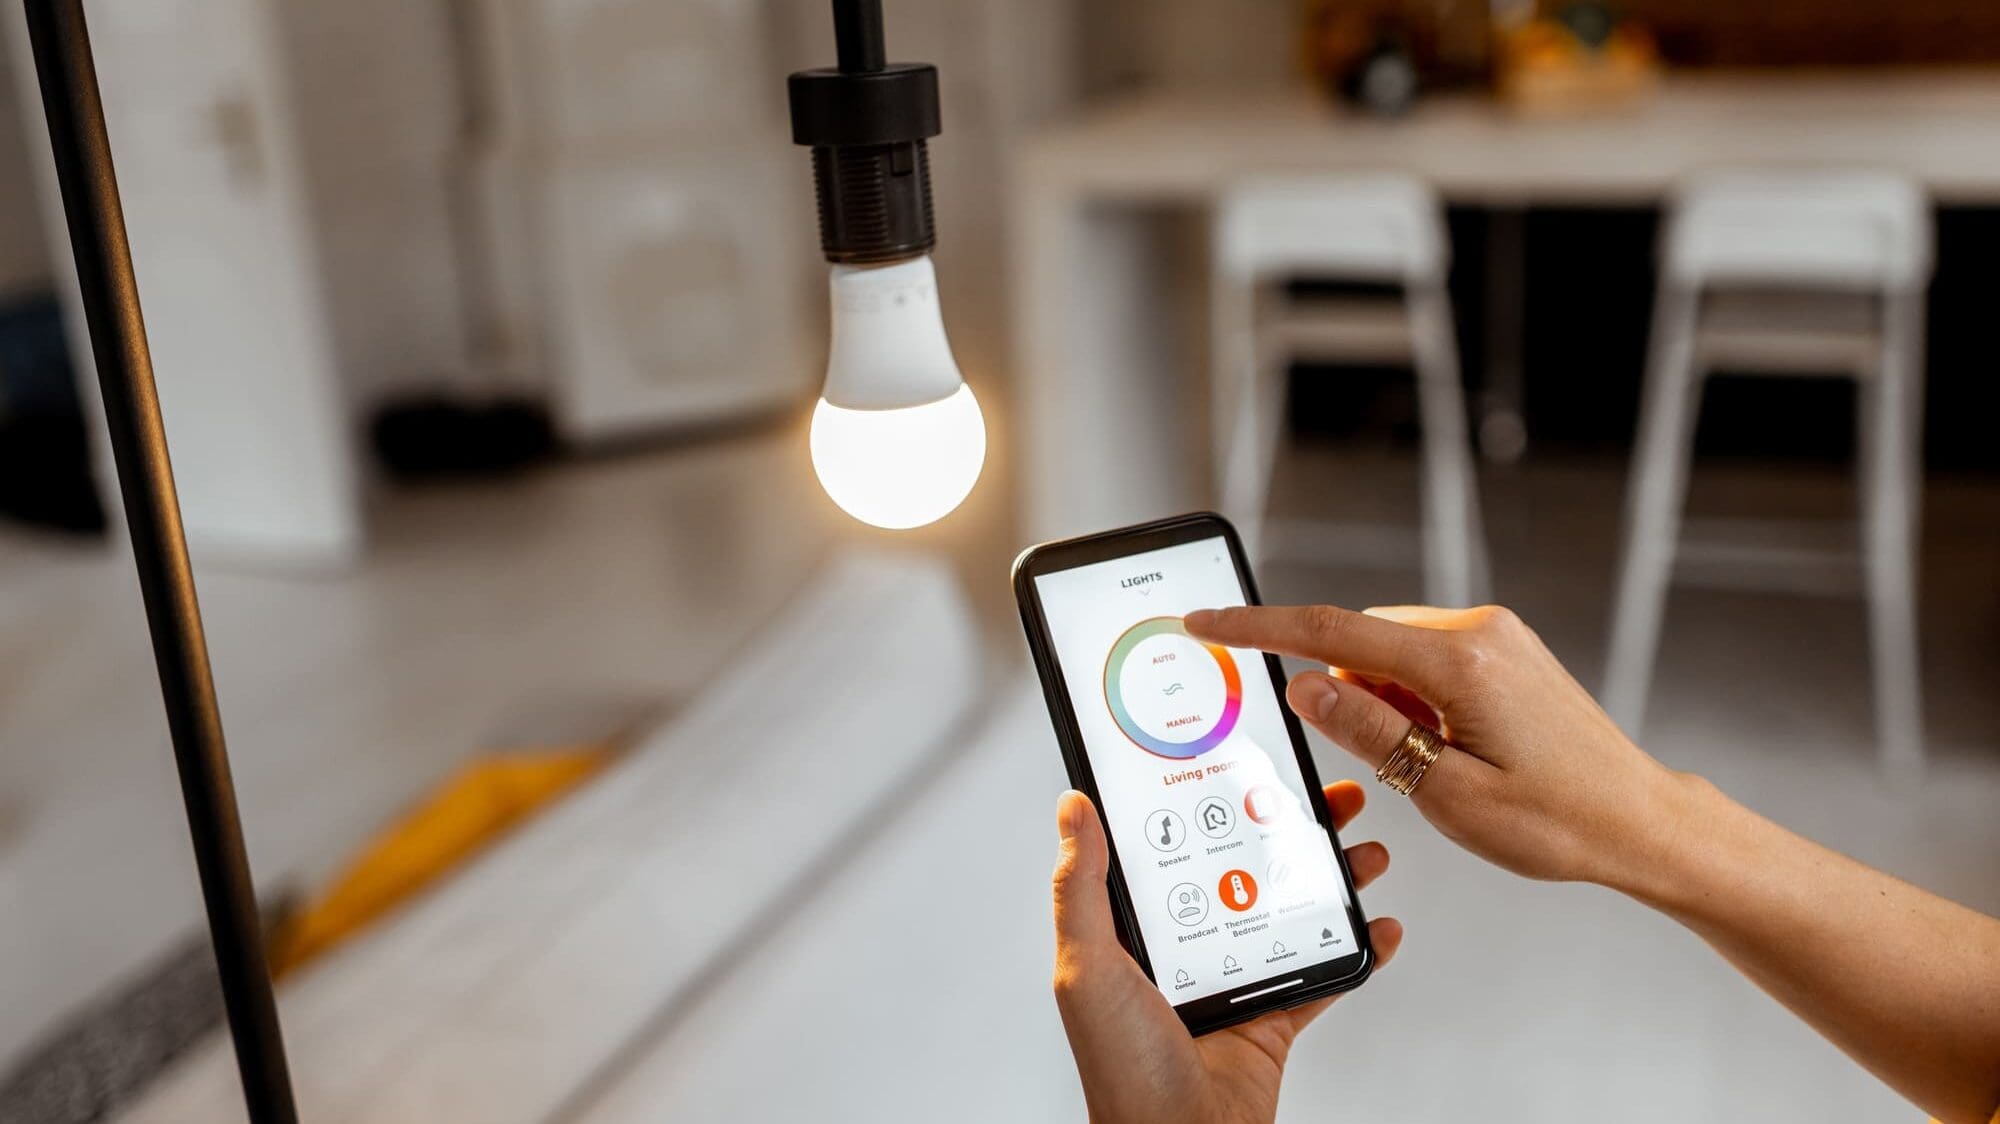 Controlling light bulb with mobile device with intelligent lighting setups for beginners